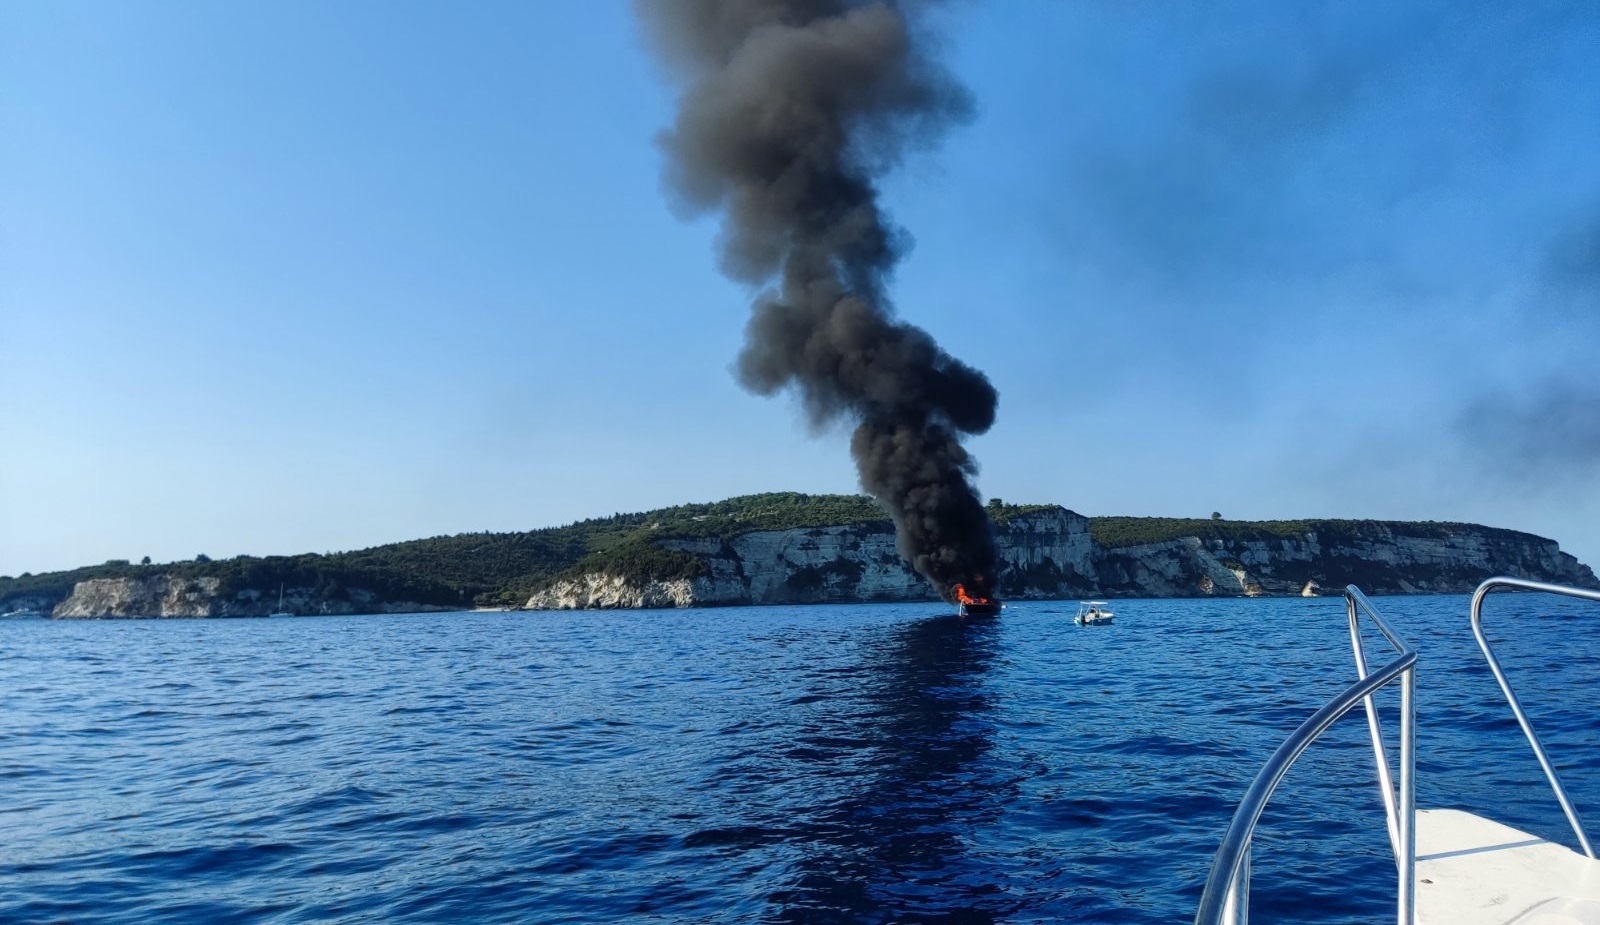 Paxos: Sailing boat on fire – All seven aboard safe and sound